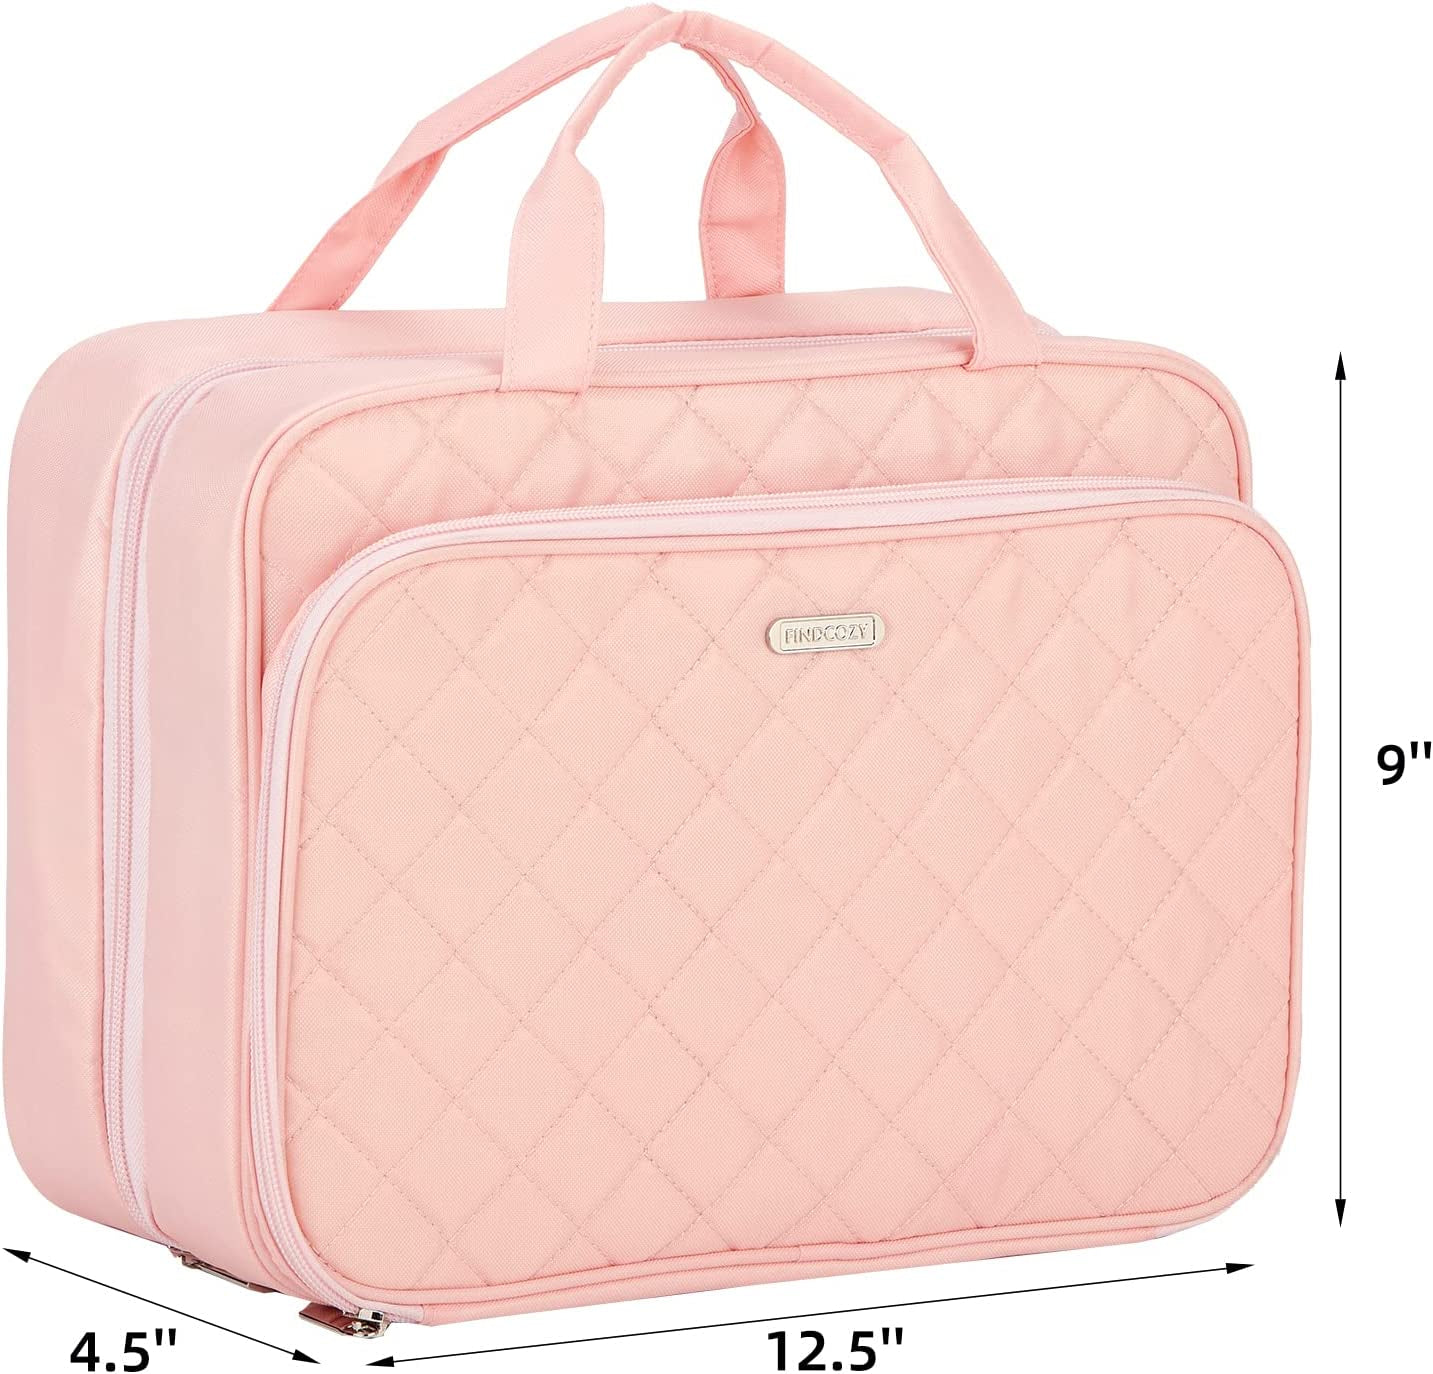 Extra Large Toiletry Bag with Hanging Hook, Travel Makeup Case for Women, Cosmetic Organizer for Toiletries, Full-Sized Bottles, Beauty, Pink